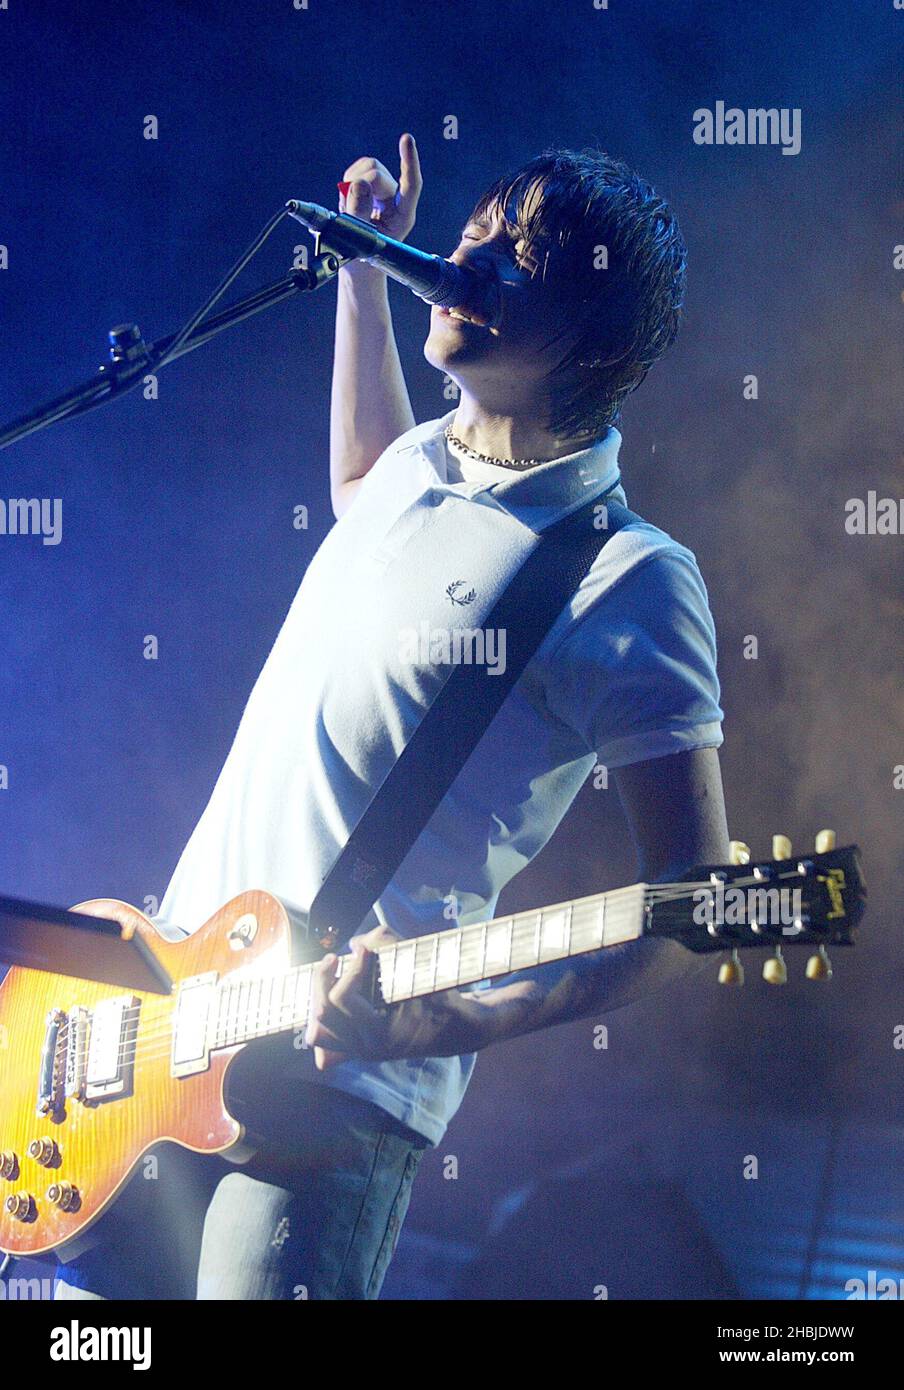 Danny Jones of McFly performs on stage on the penultimate night of their tour plugging debut album 'Room On The 3rd Floor' at the Carling Apollo Hammersmith on October 12, 2004 Stock Photo